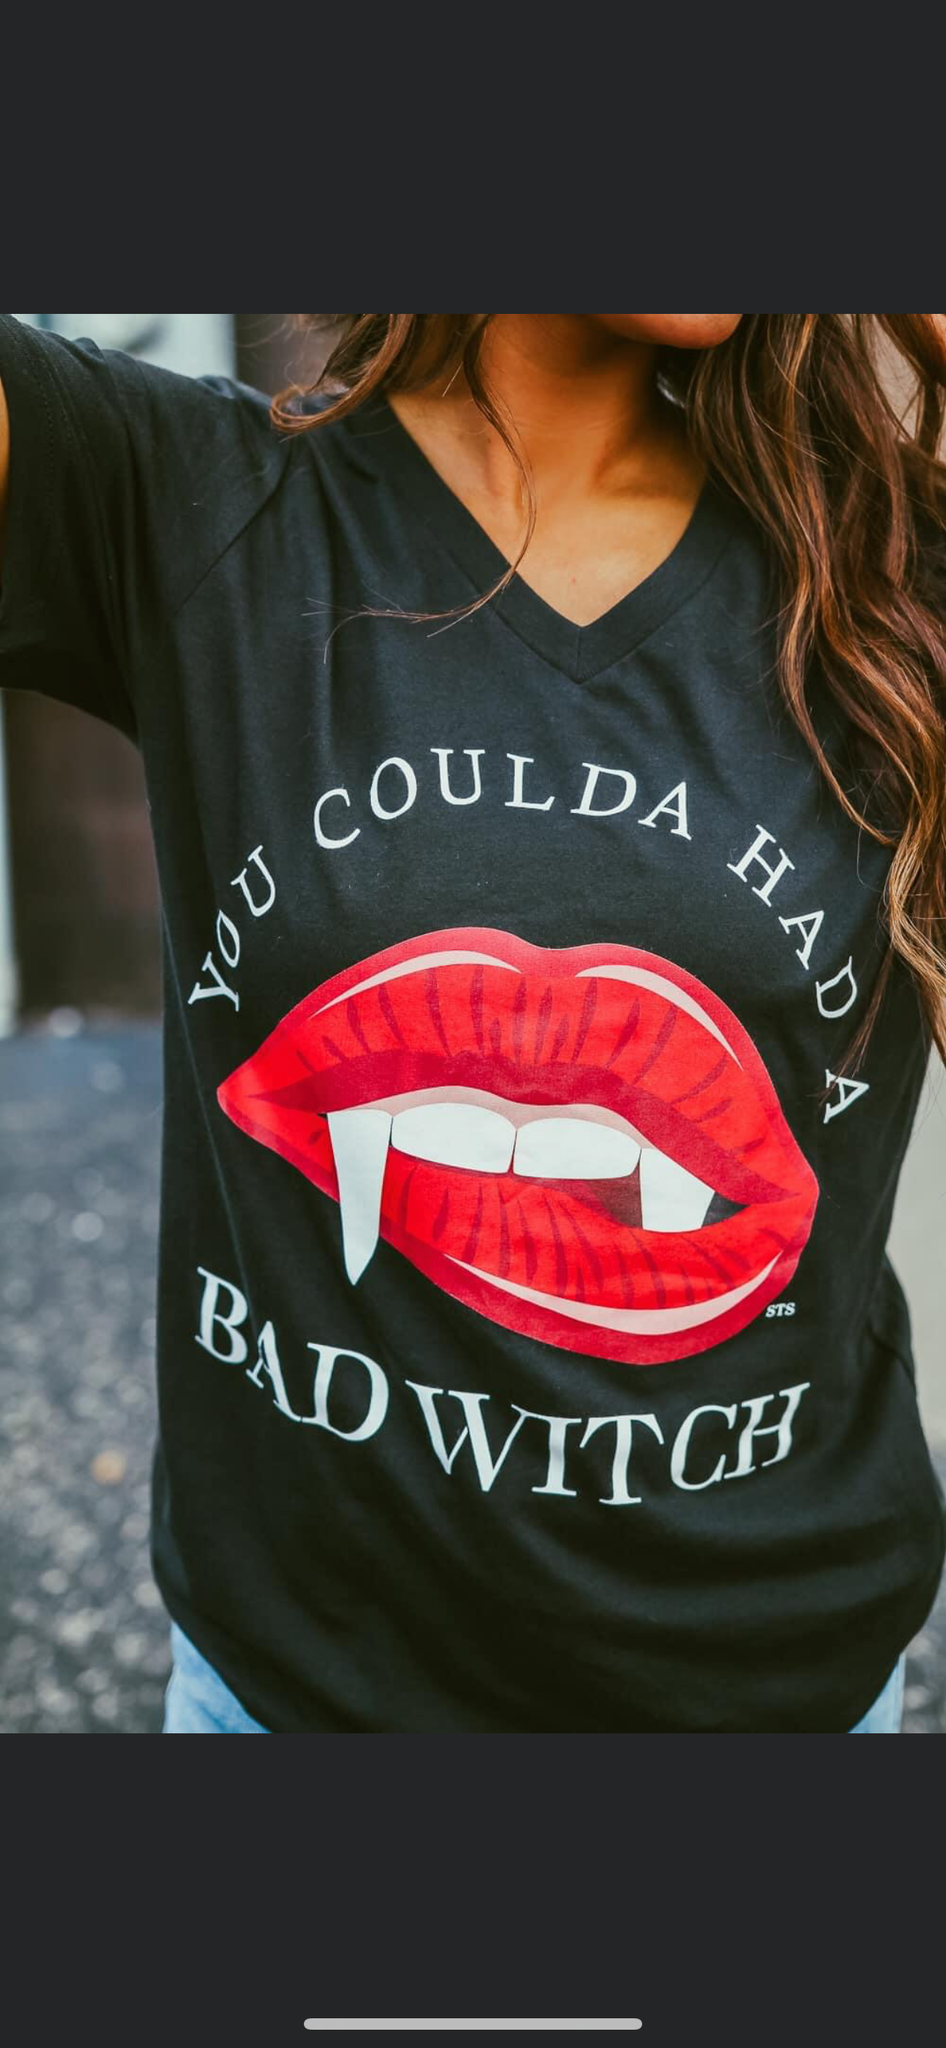 You coulda had a bad witch tee